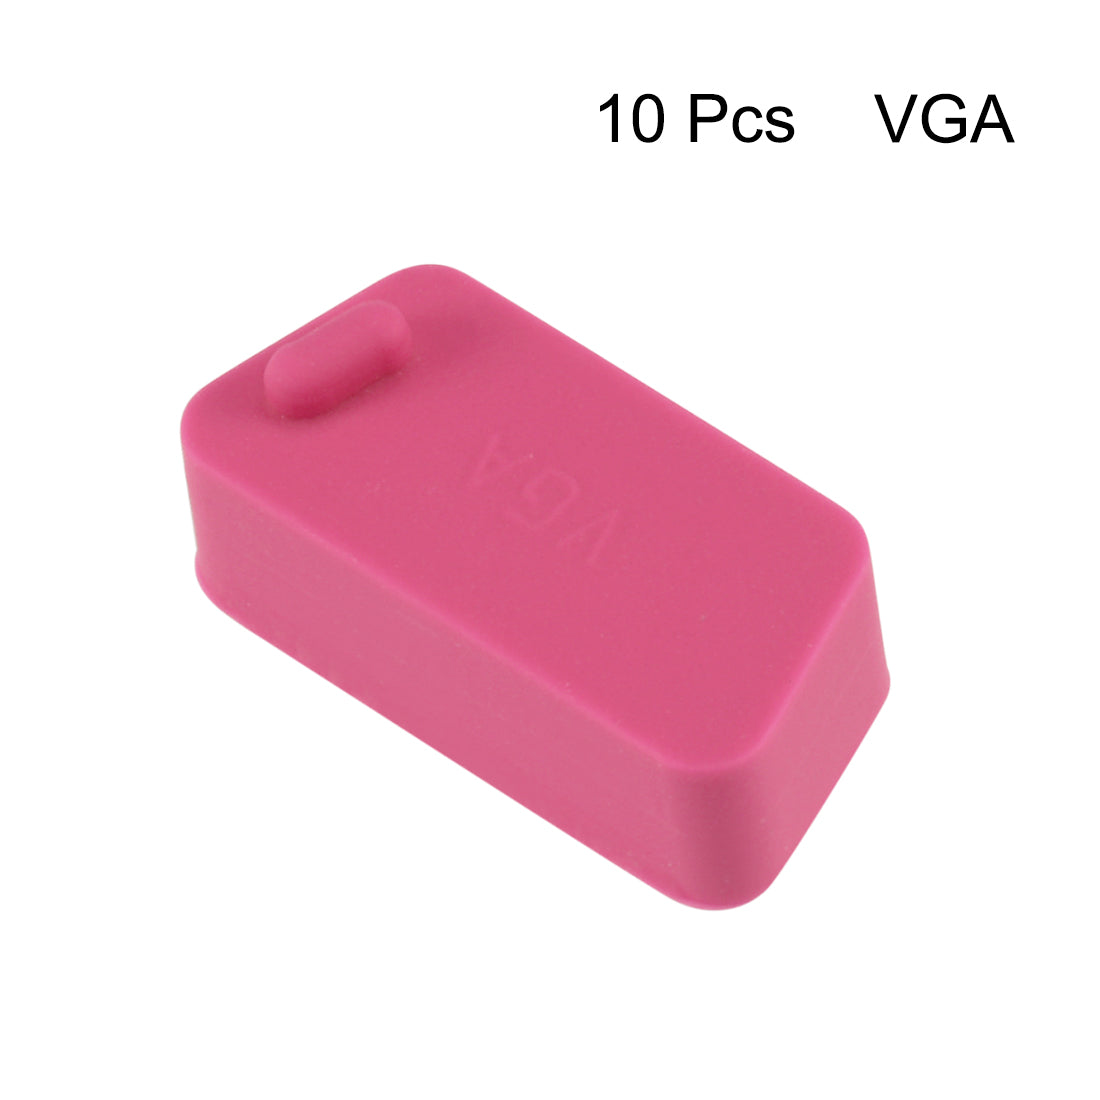 uxcell Uxcell 10pcs VGA Port Cover Silicone Anti Dust Protectors Cap for DB9, Rose Red